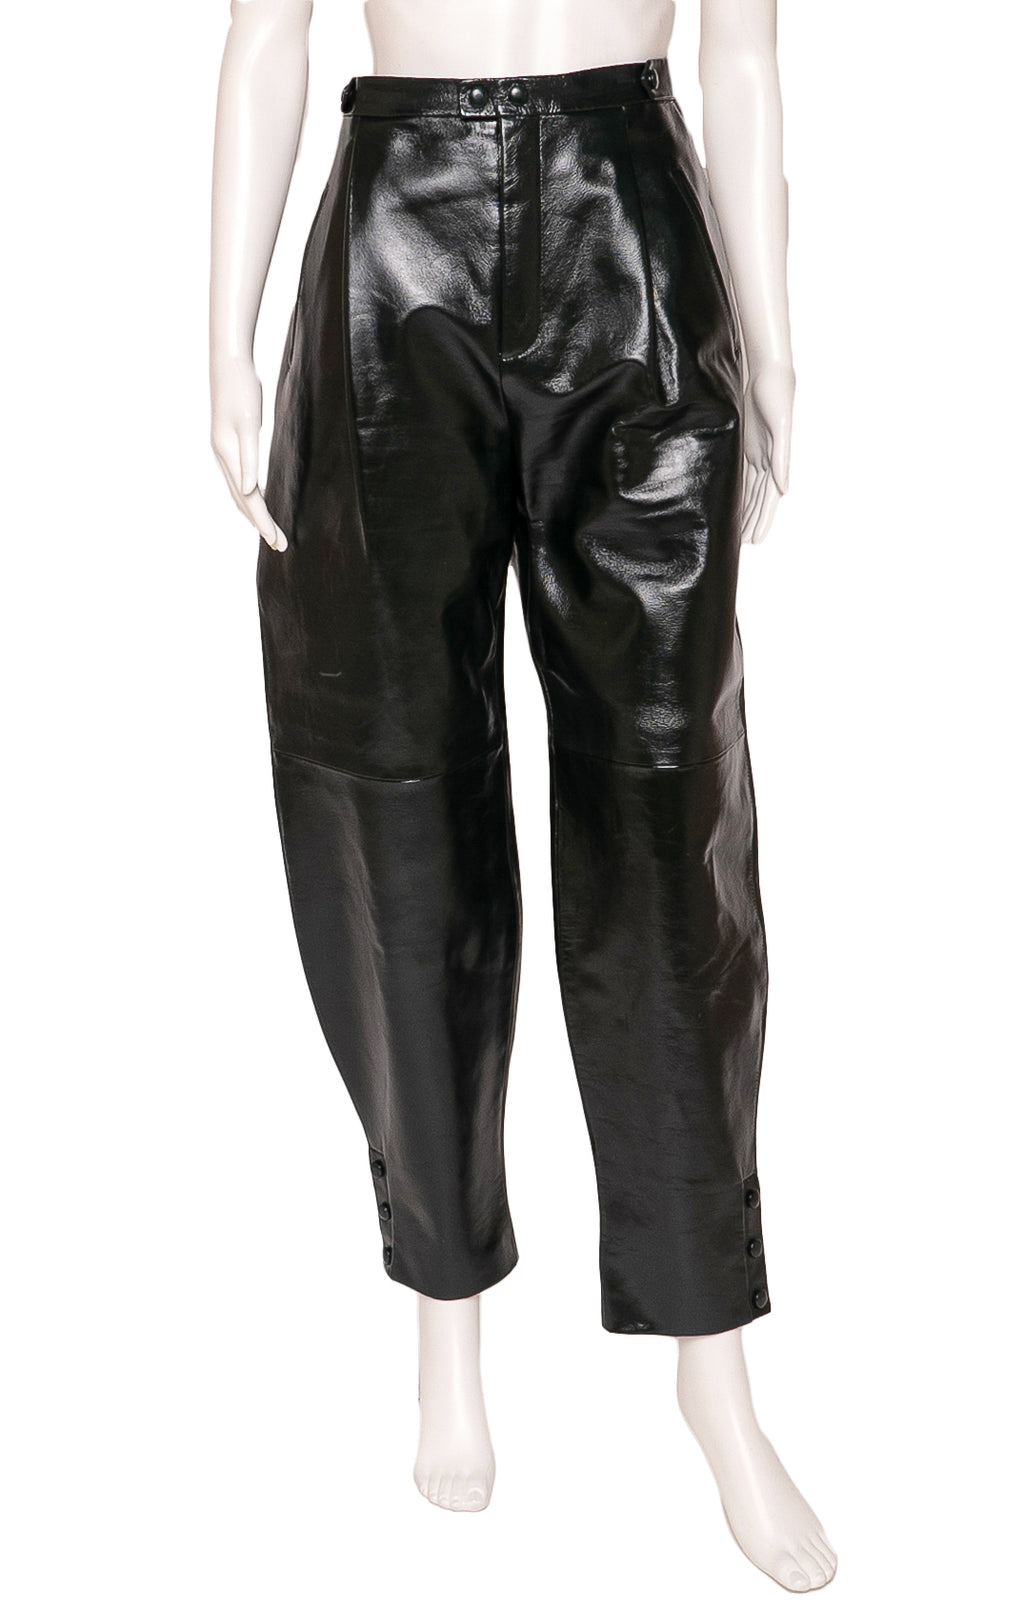 GIVENCHY  Pants Size: IT 42 (comparable to US 4-6)